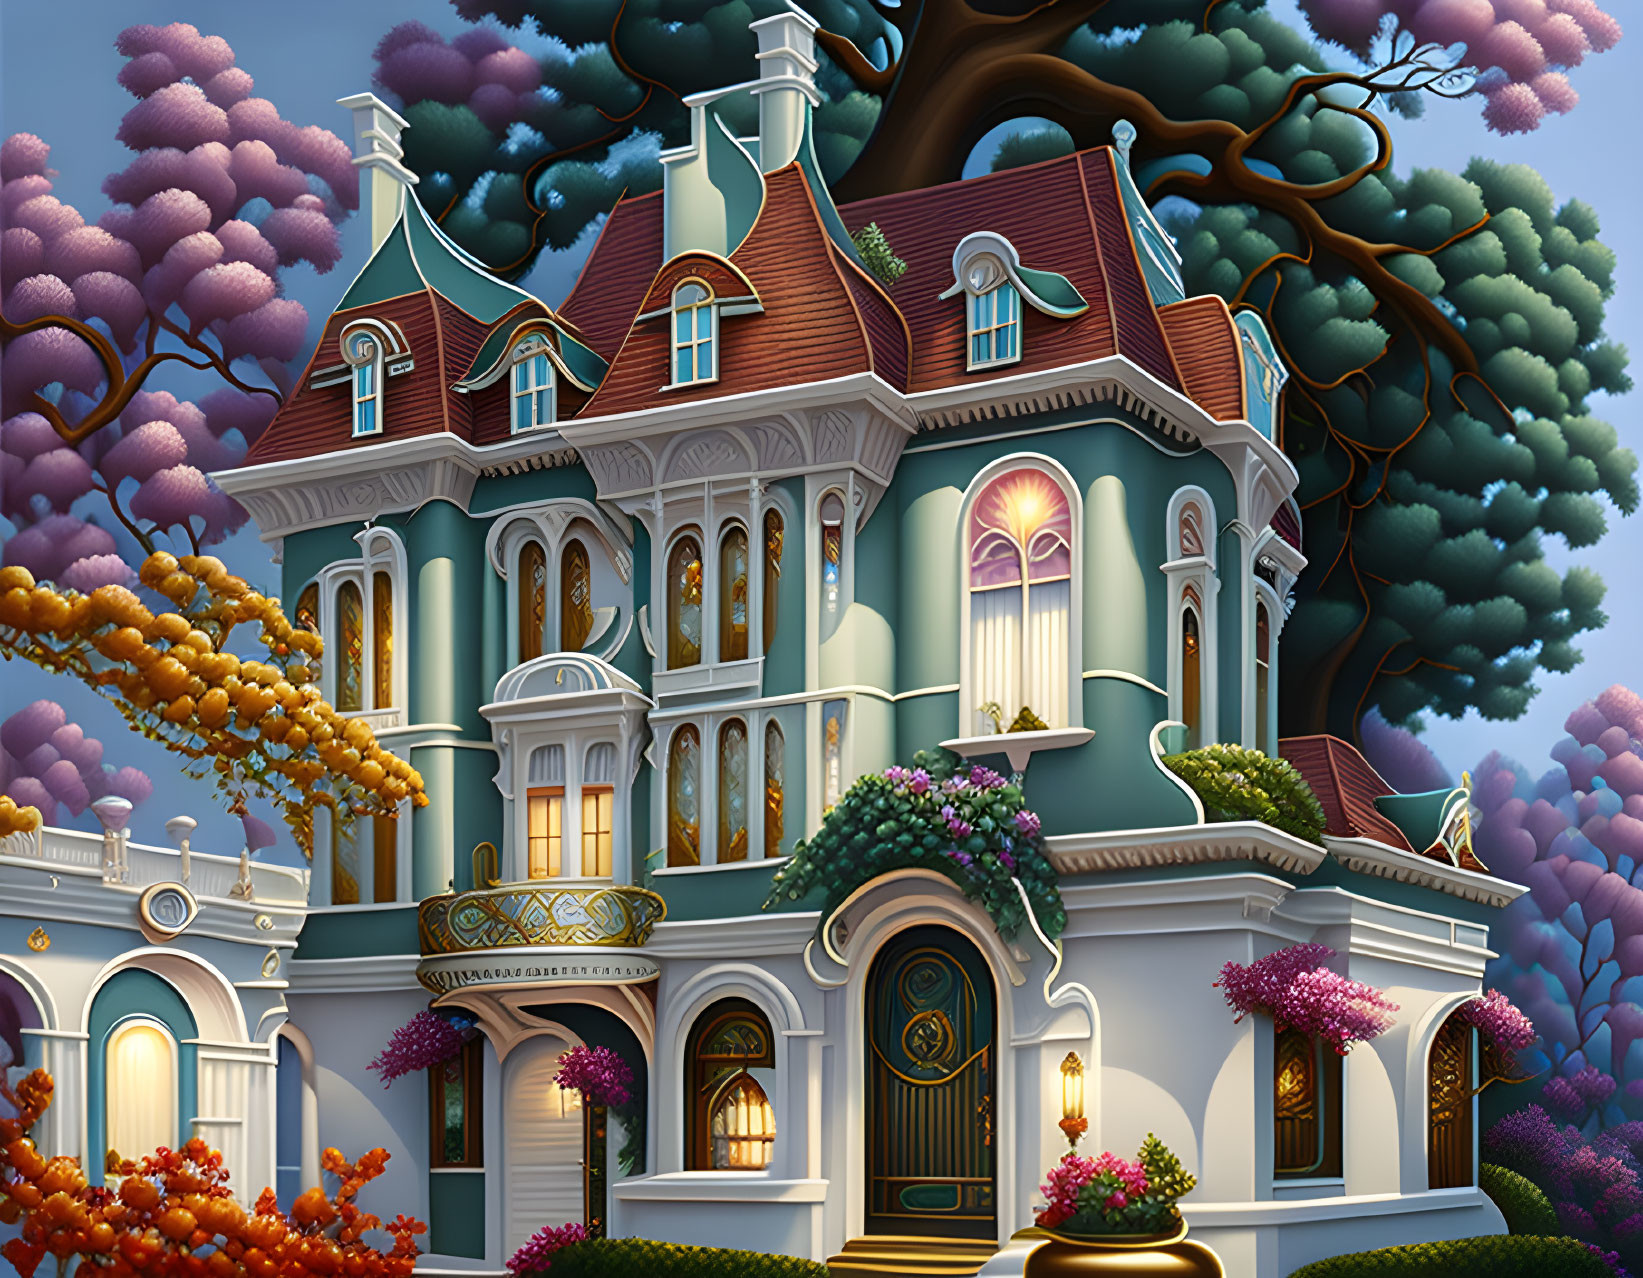 Victorian-style house illustration with whimsical trees and ornate details